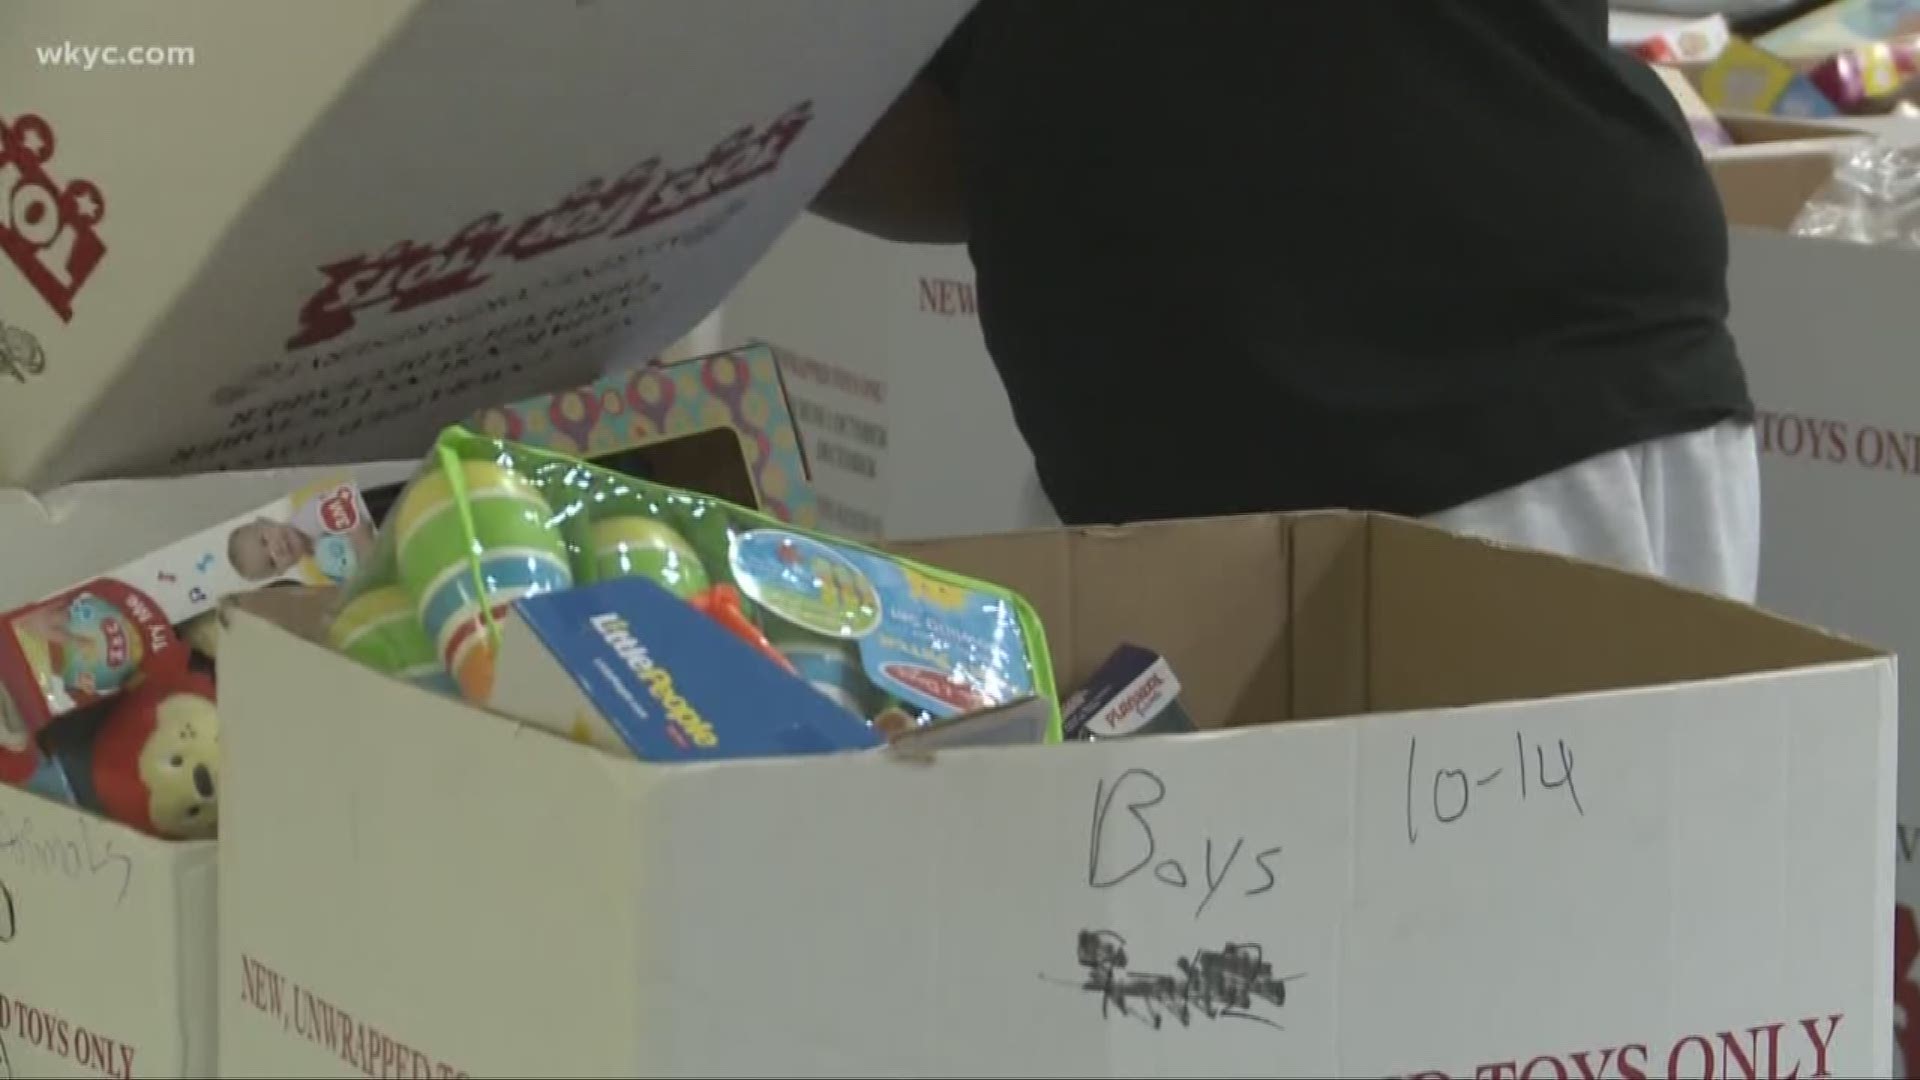 Criminals posed as volunteers steal toys from local toy drive